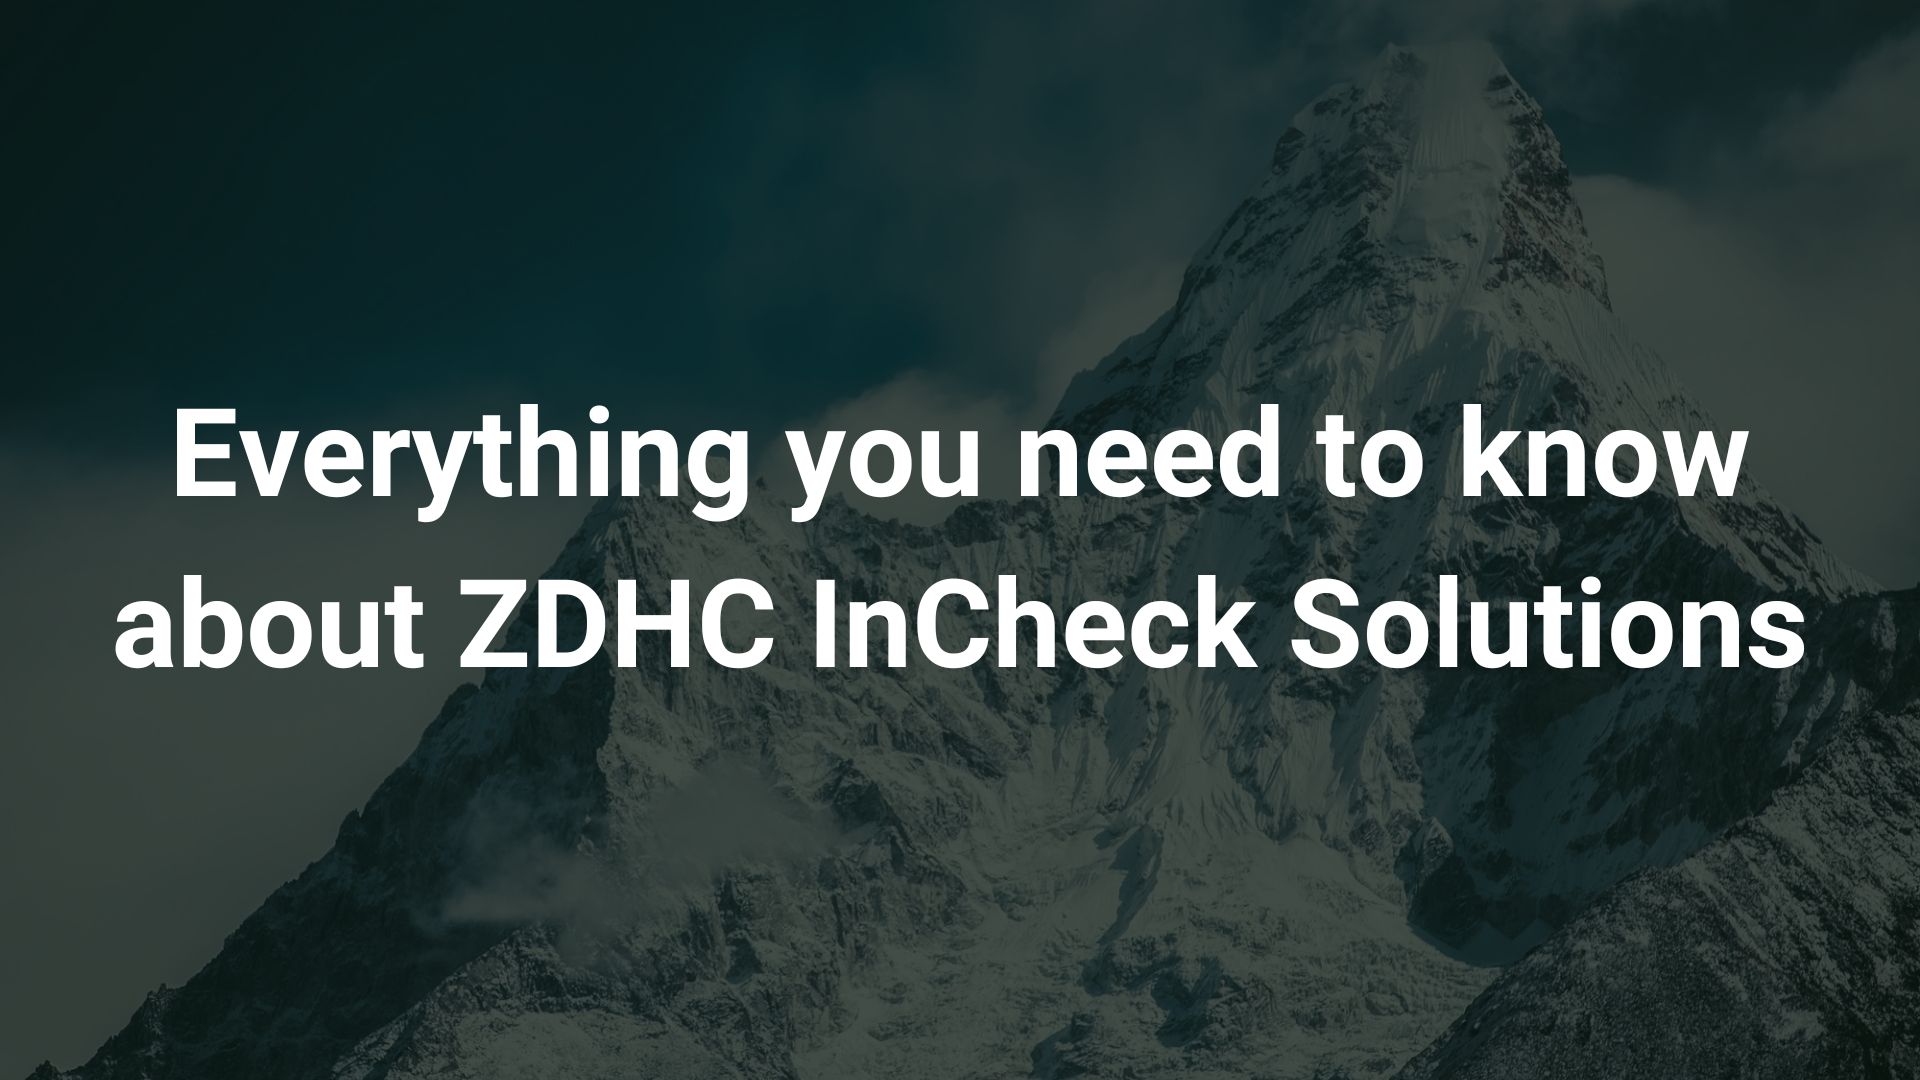 Everything you need to know about ZDHC InCheck Solutions